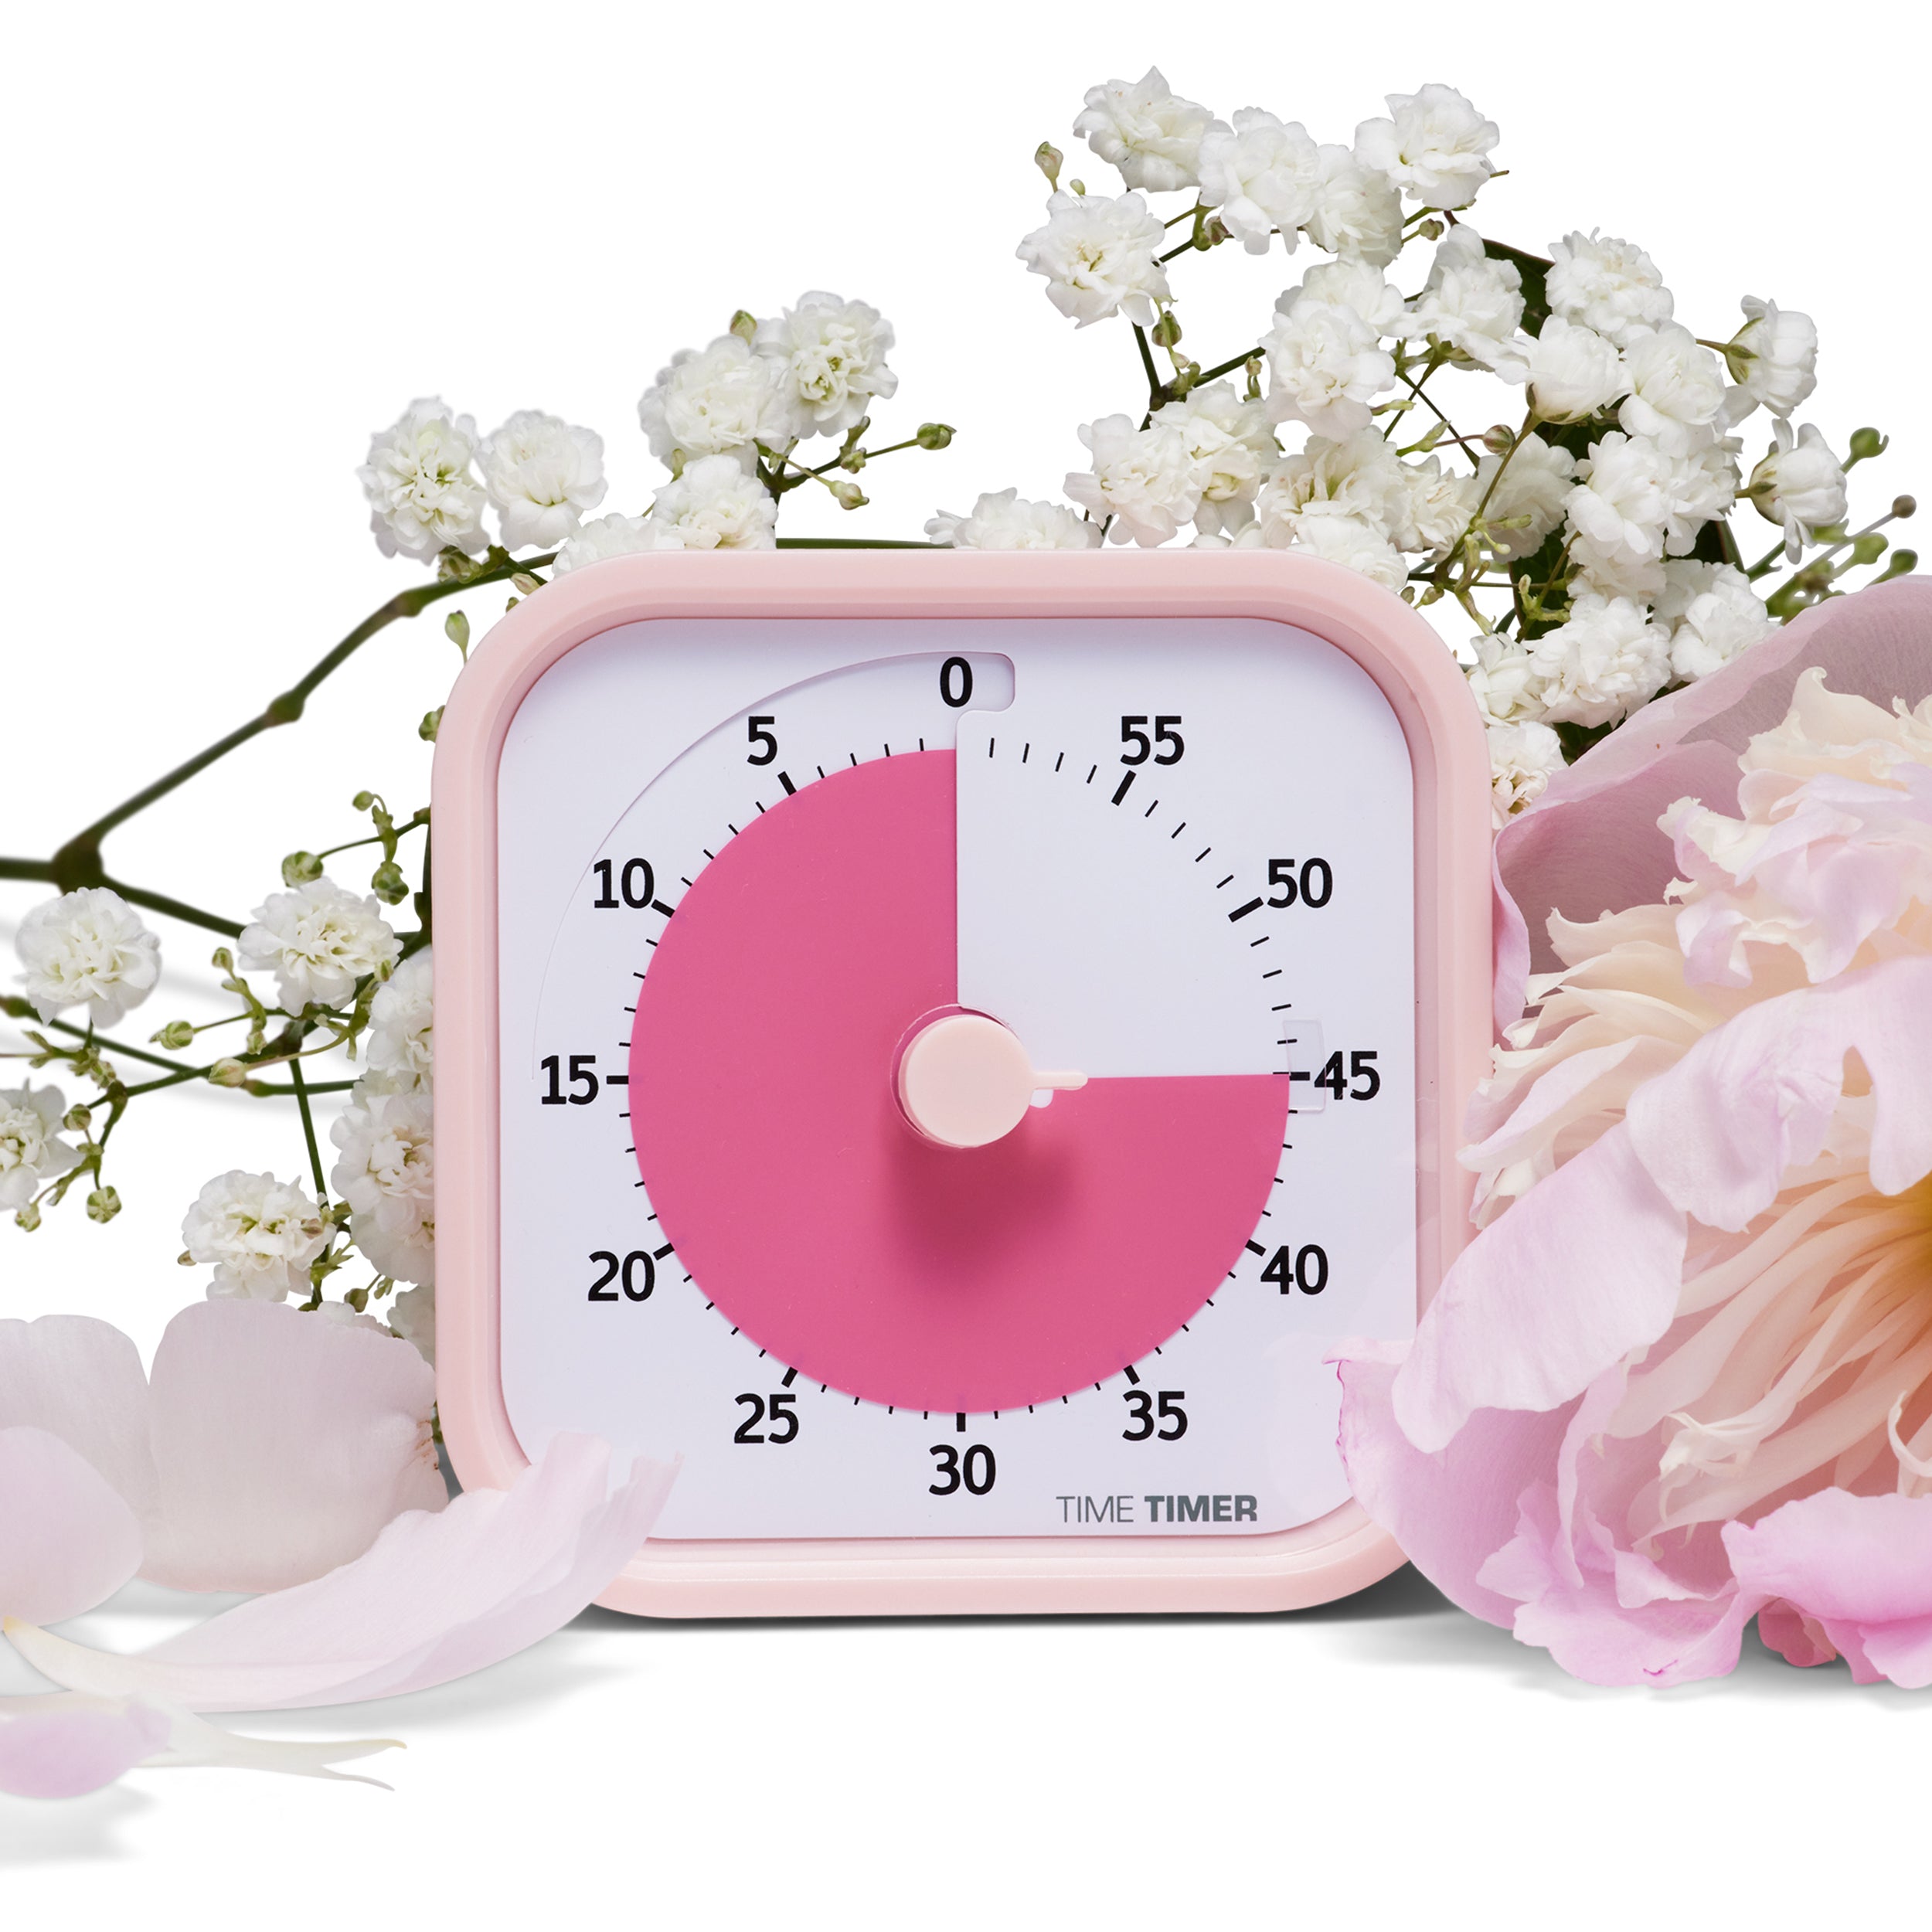 60 minute visual Timer - Time Timer MOD® - Home Edition Peony Pink